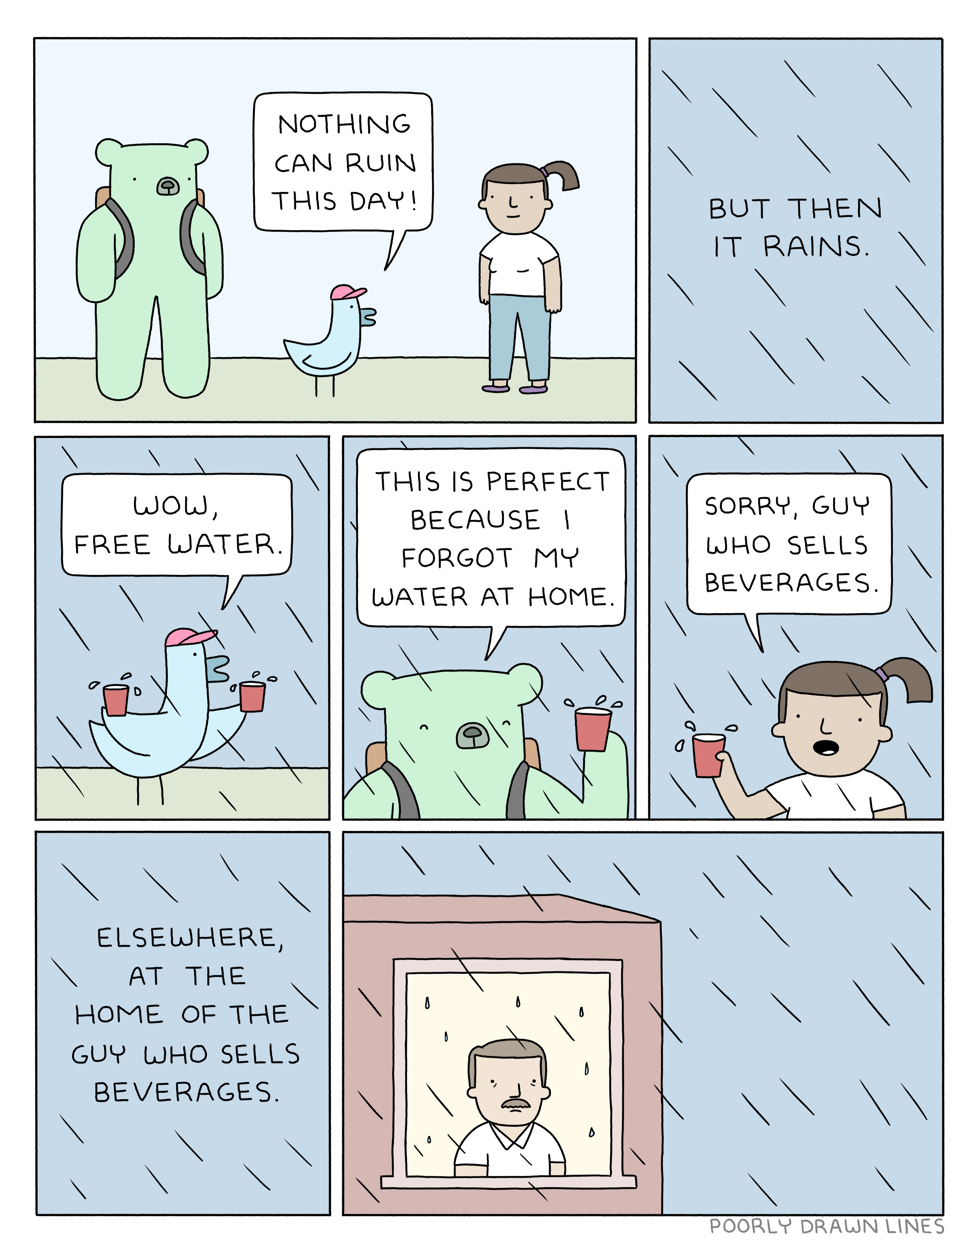 Poorly Drawn Lines – Ruin This Day